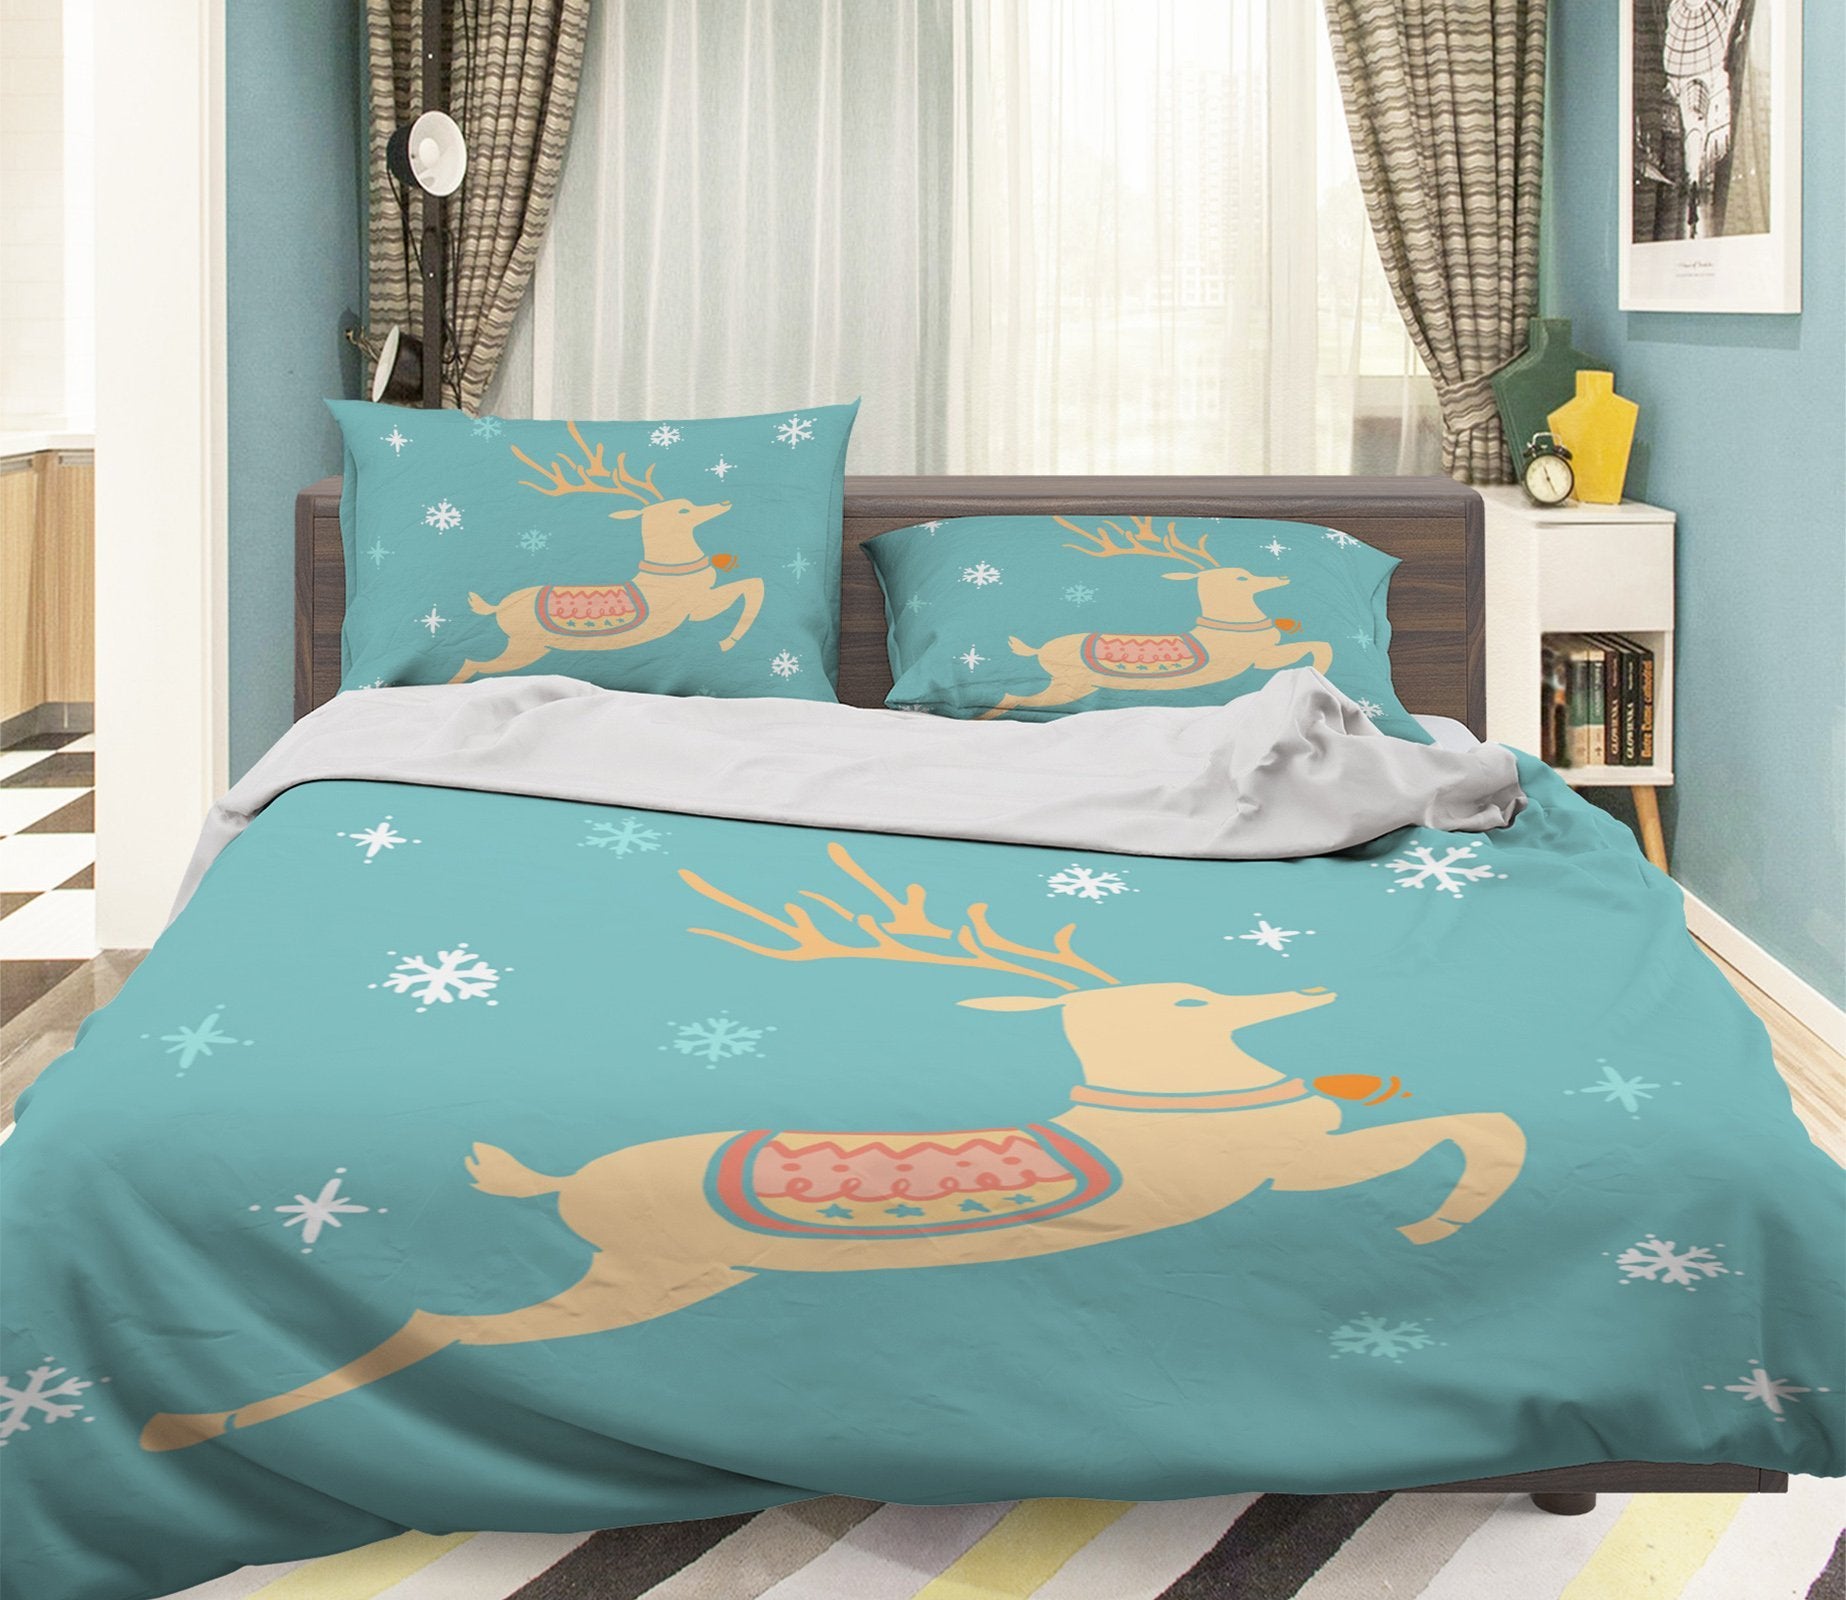 3D Christmas Jumping Deer 19 Bed Pillowcases Quilt Quiet Covers AJ Creativity Home 